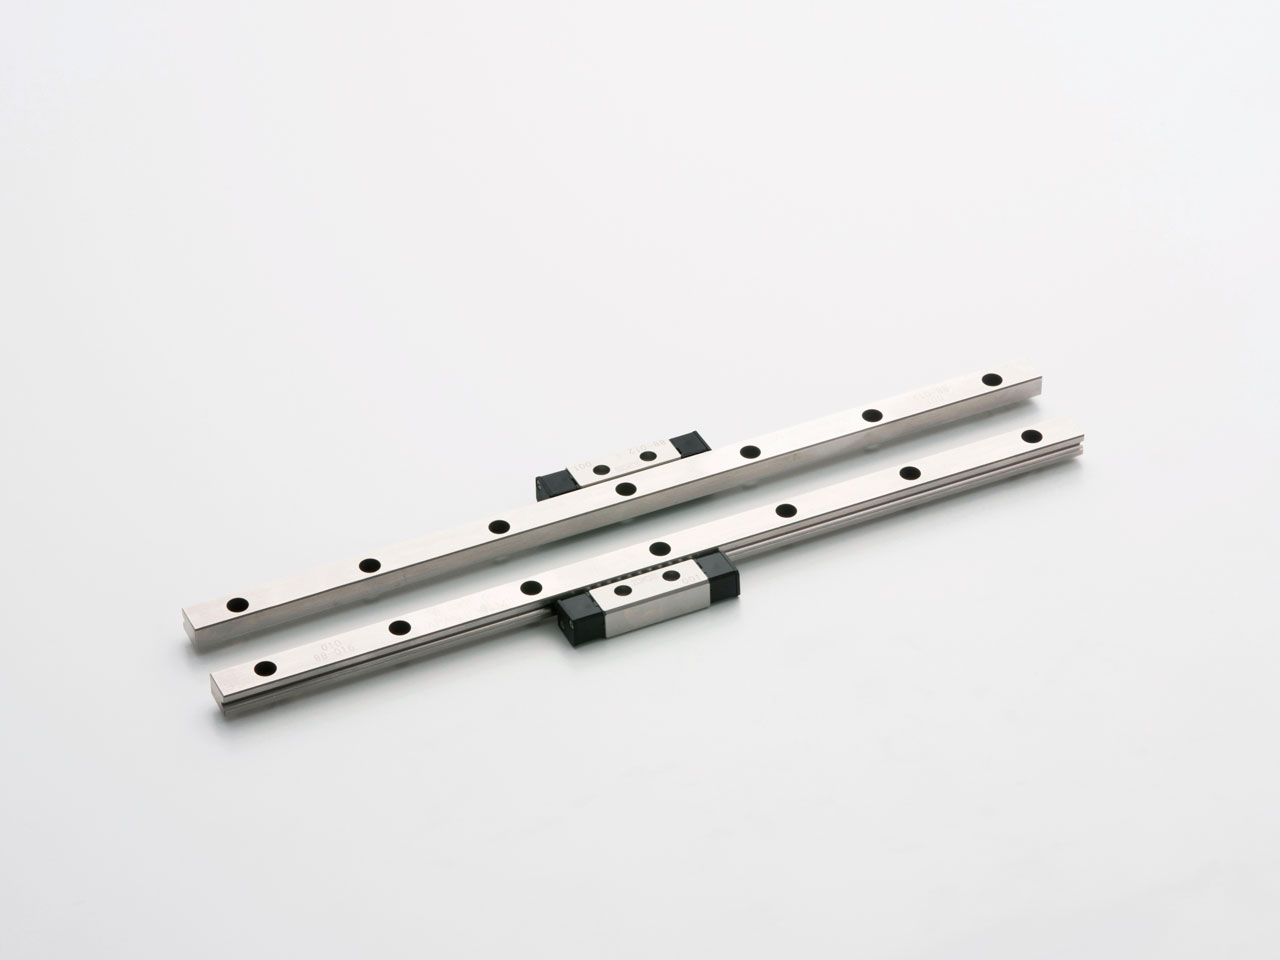 New Iko Linear Way Lwl9c1bps2 Miniature Linear Motion Rolling Guide 